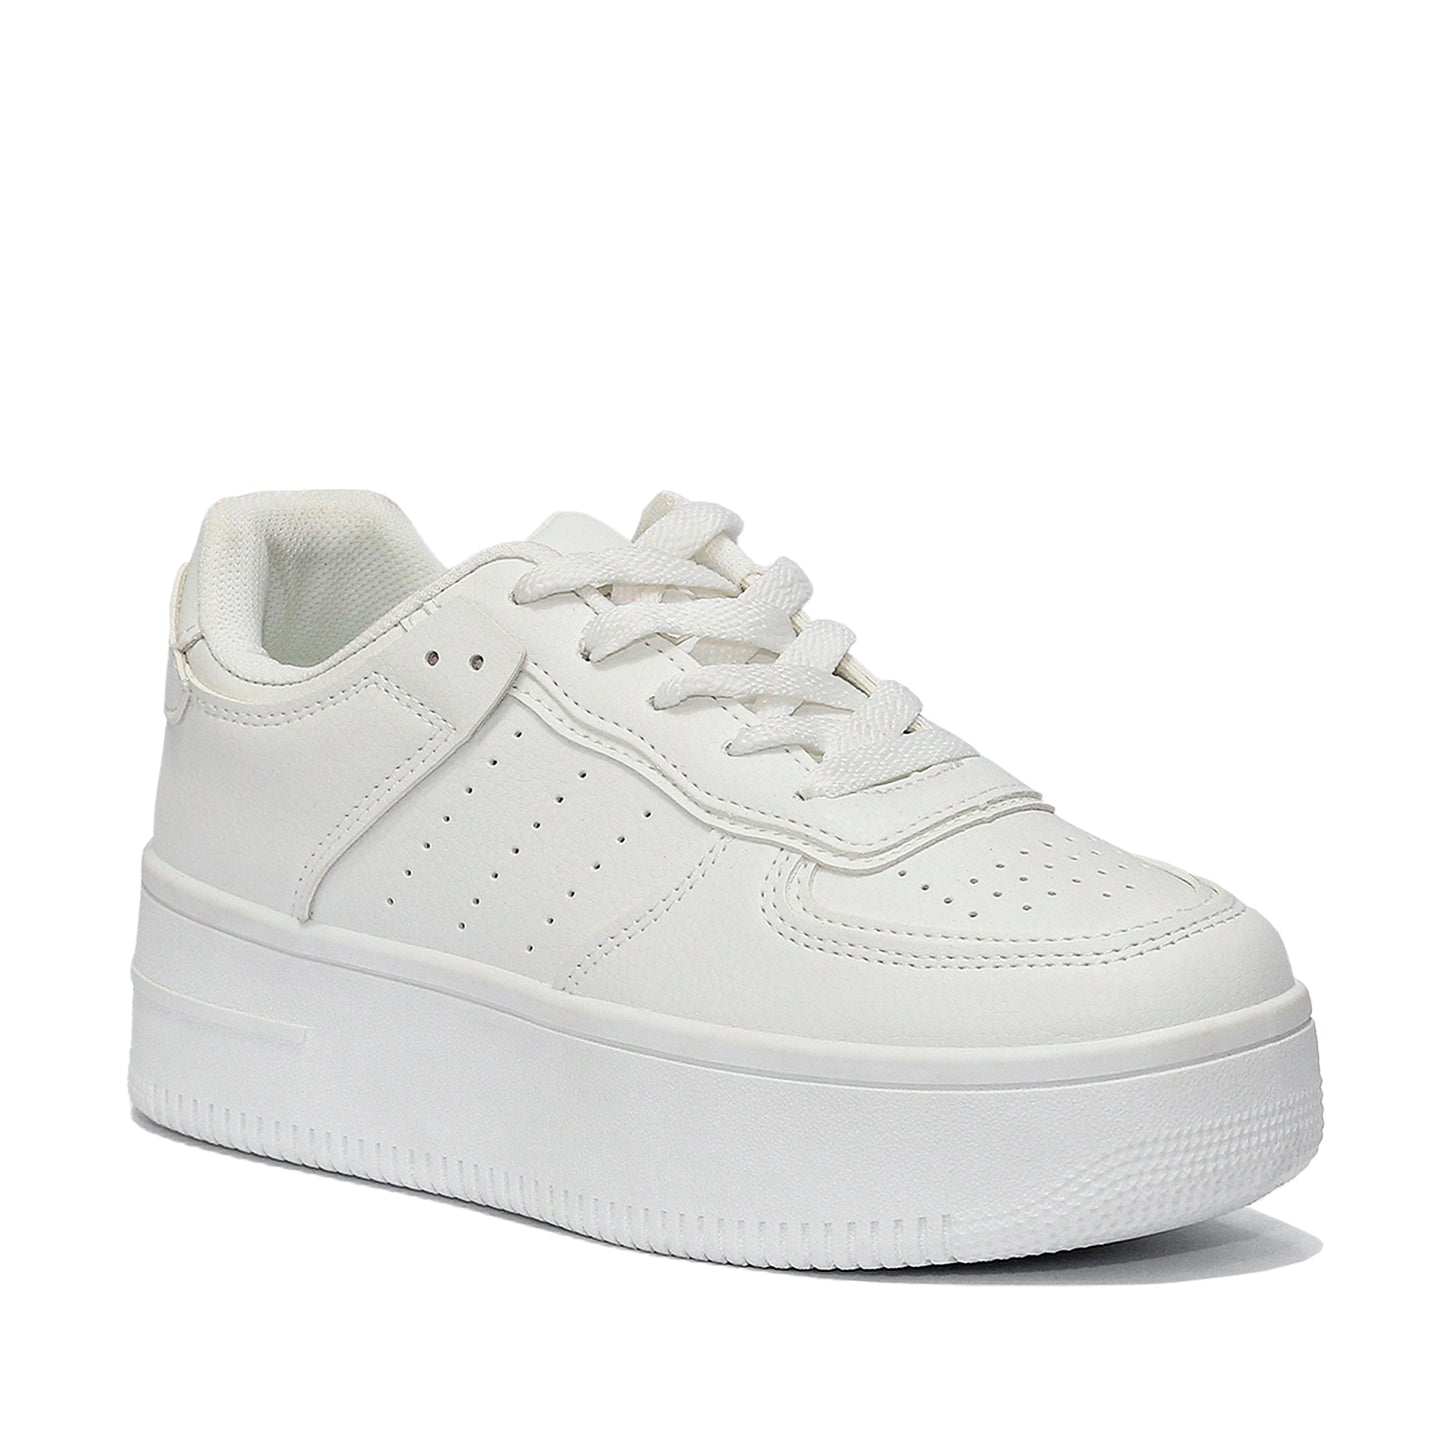 Simple High-Sole White Sneakers For Girls